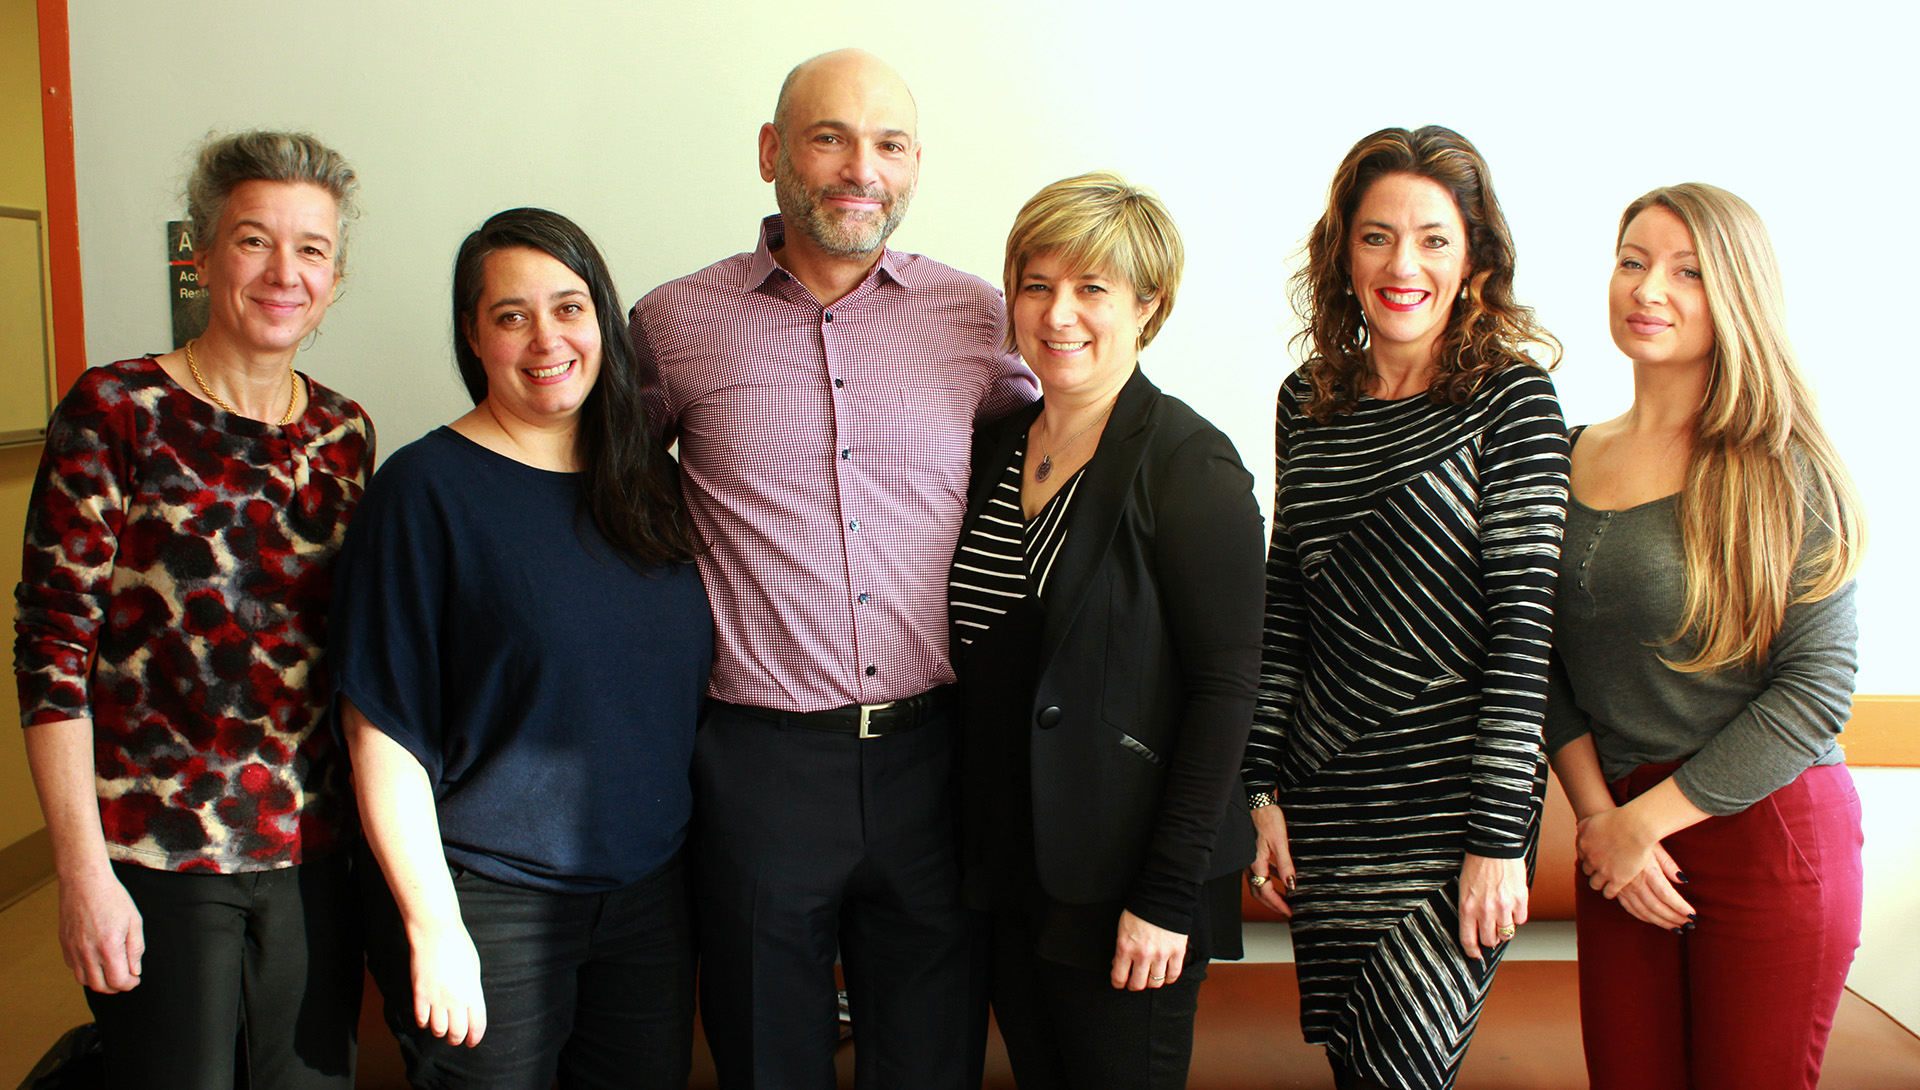 From left to right: Evelyn Andelfinger, Laura Copeland, Dr. Richard Montoro, Dr. Karine Igartua, Vicky Rochon, and Marsha Kagan.